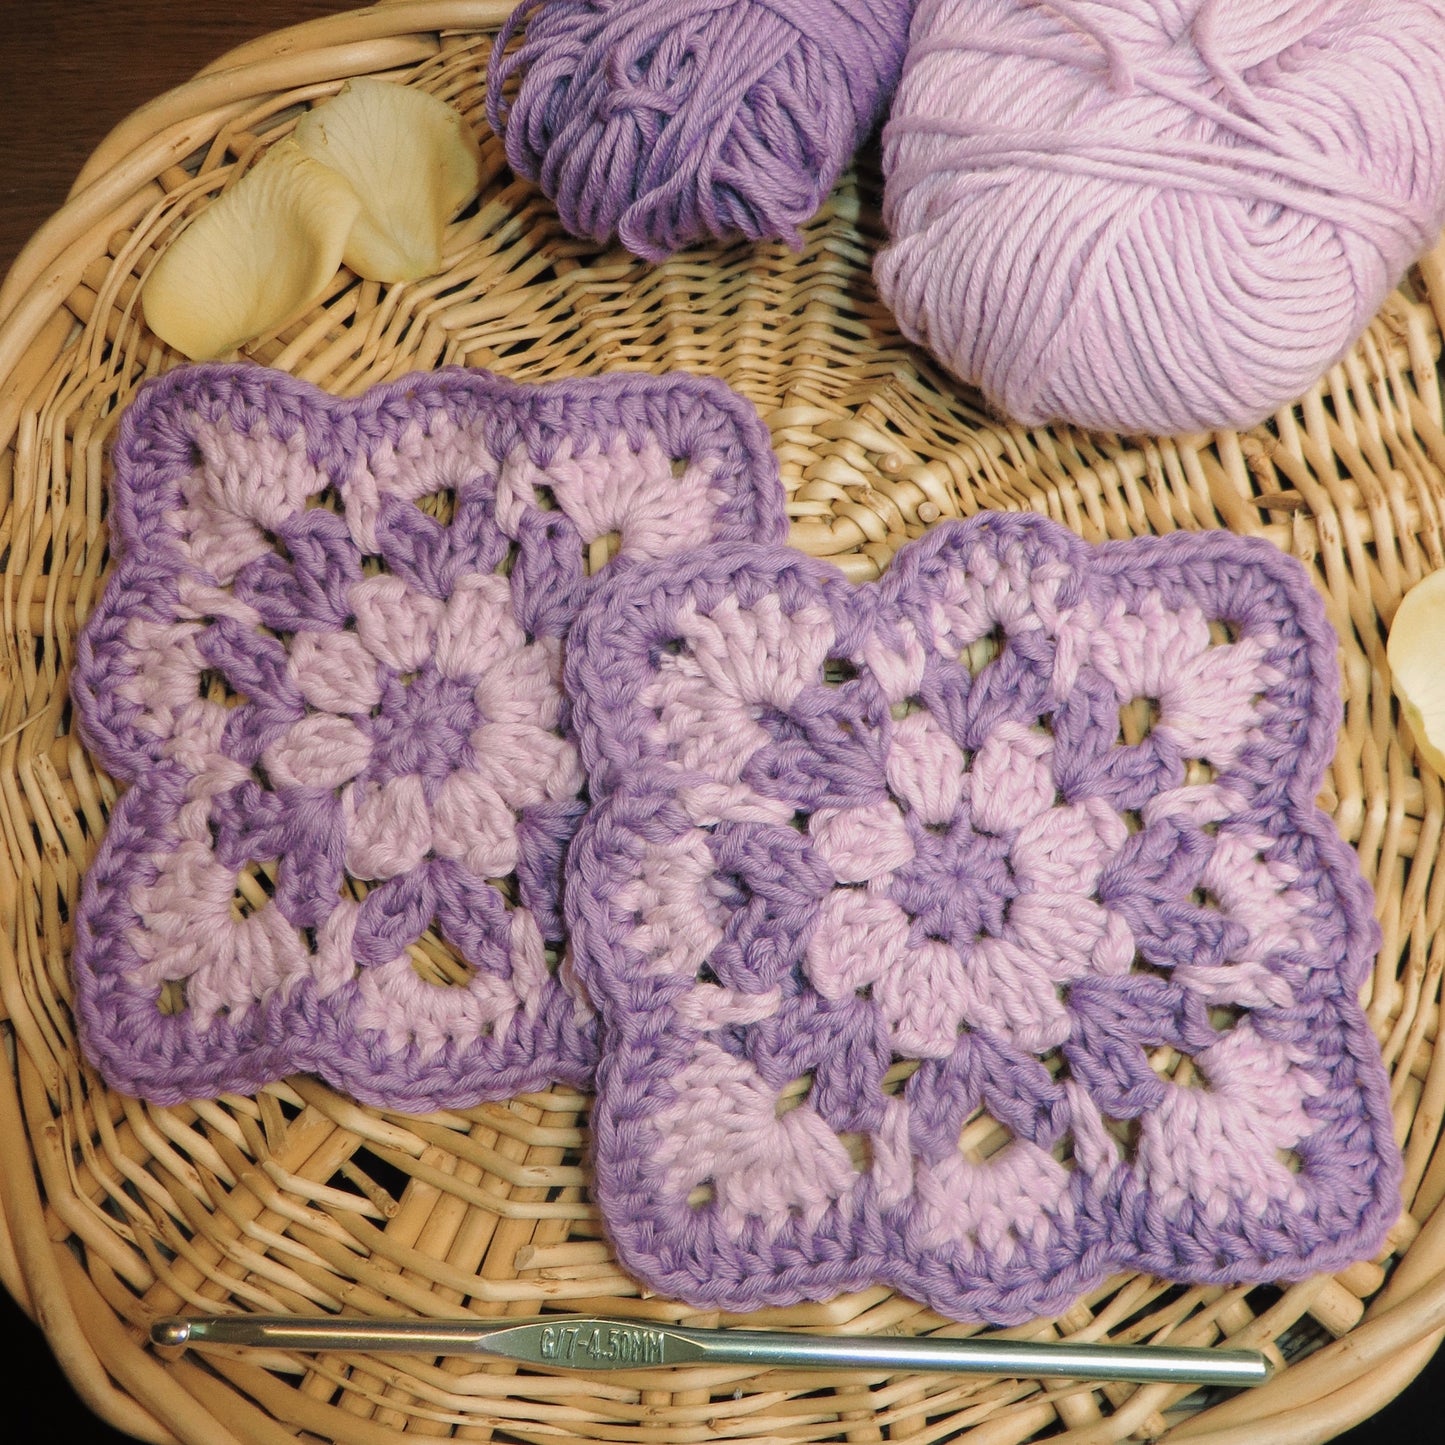 The Lila Flower Square - Pattern